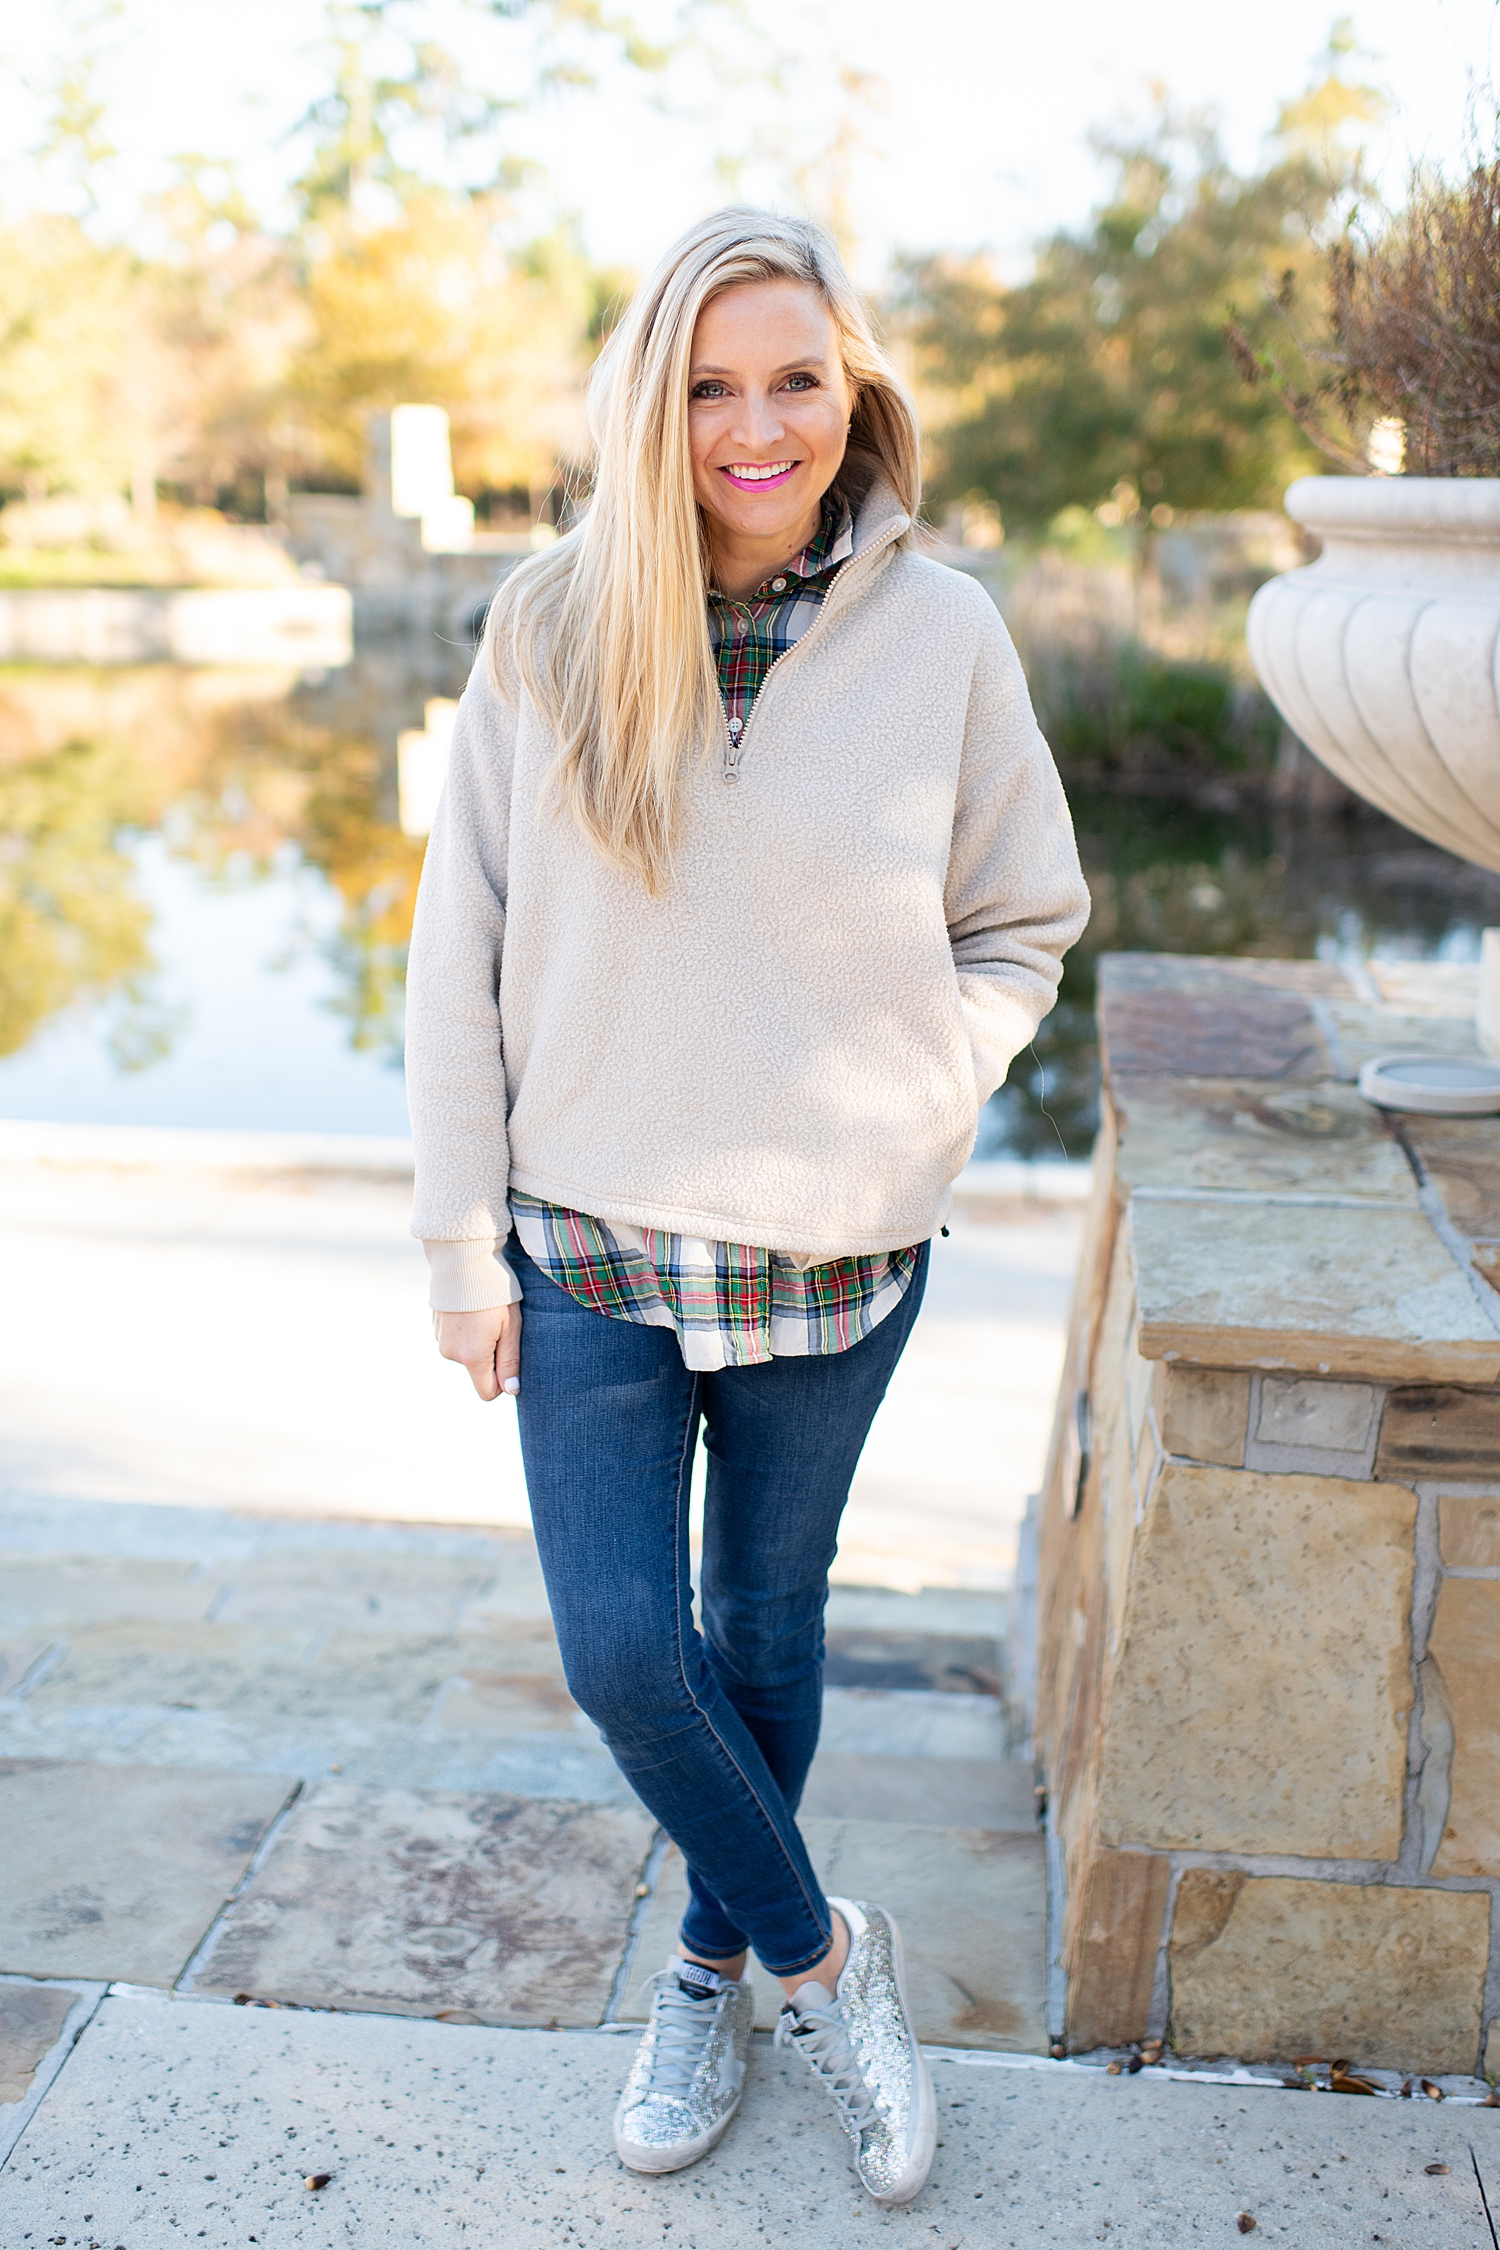 The Best Cozy Gift Ideas featured by top Houston fashion blogger, Fancy Ashley: picture of a blonde woman wearing an Everlane zip fleece, J.Crew tartan shirt, J.Crew skinny jeans and Golden Goose sneakers